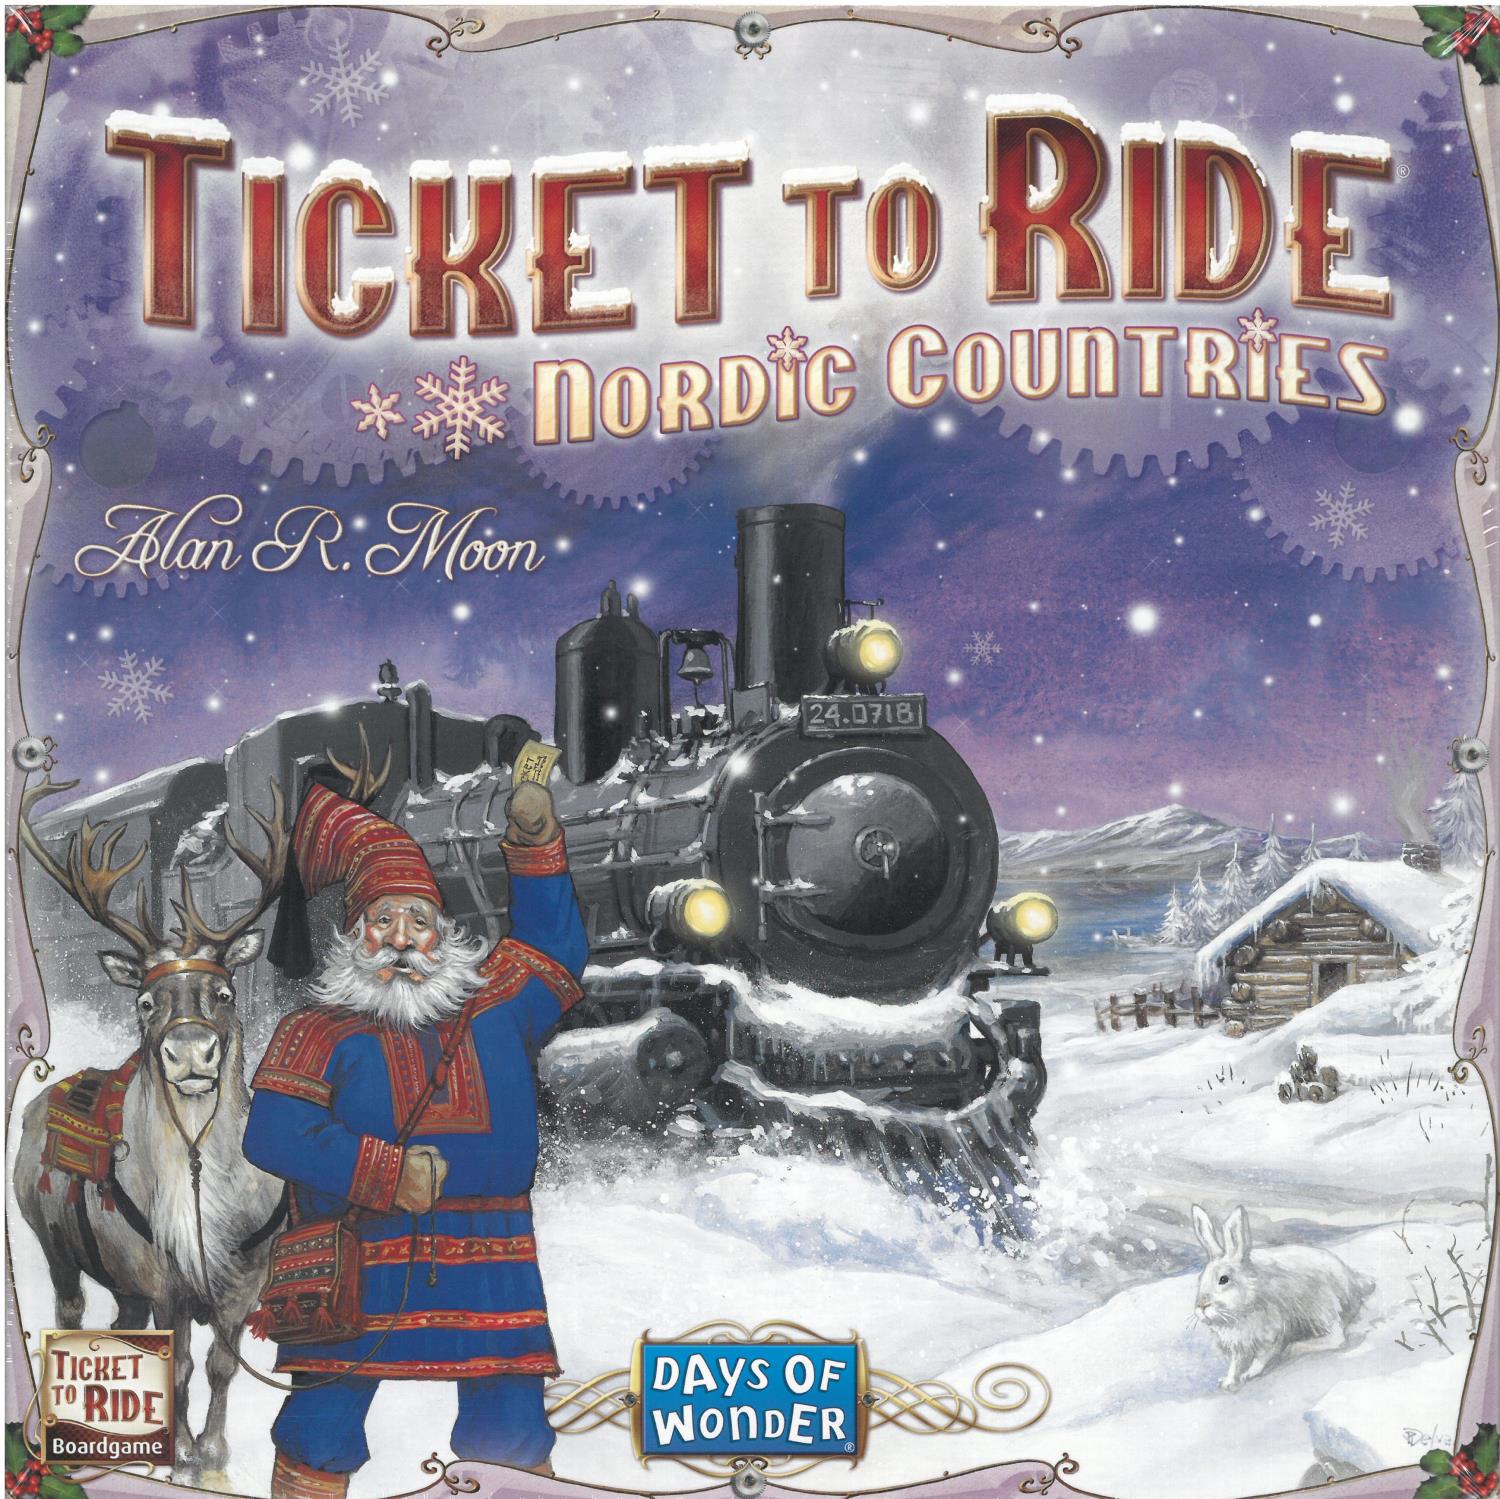 Ticket to ride, nordic